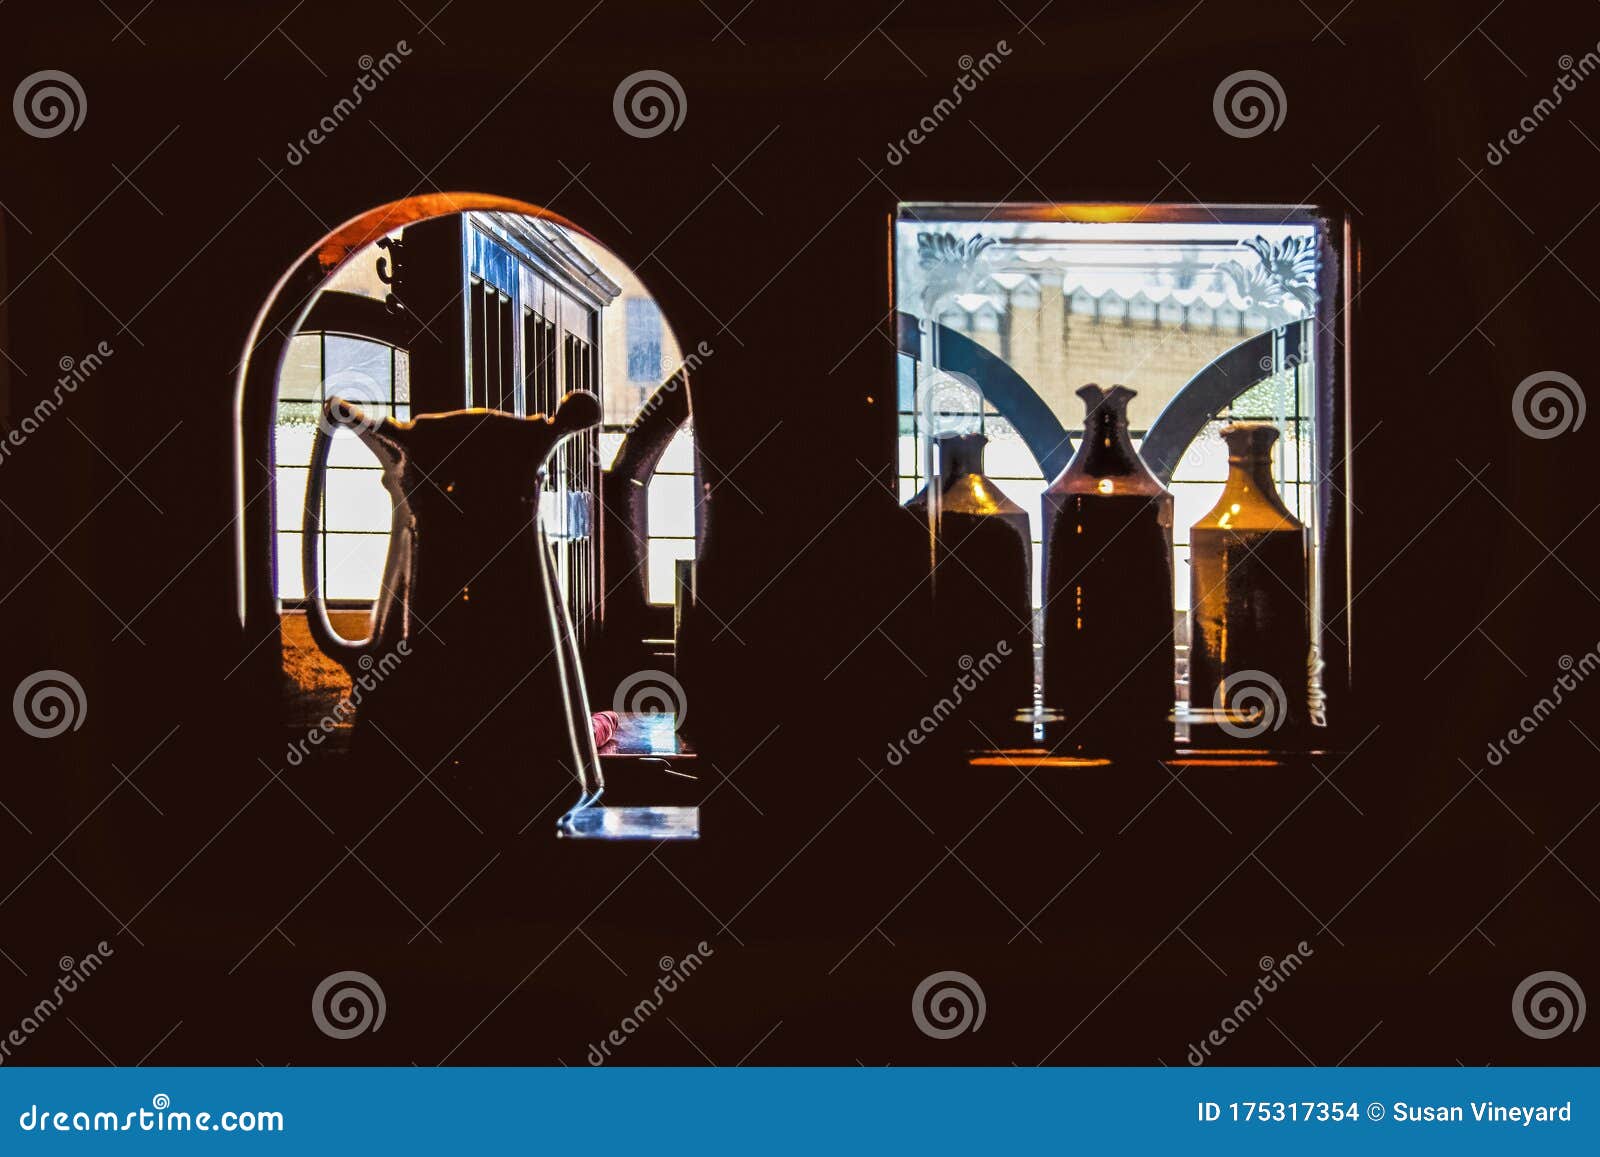 stilllife view of windows through cubbies with etched glass in a dark pub with tables and a castle viewed through distant windows